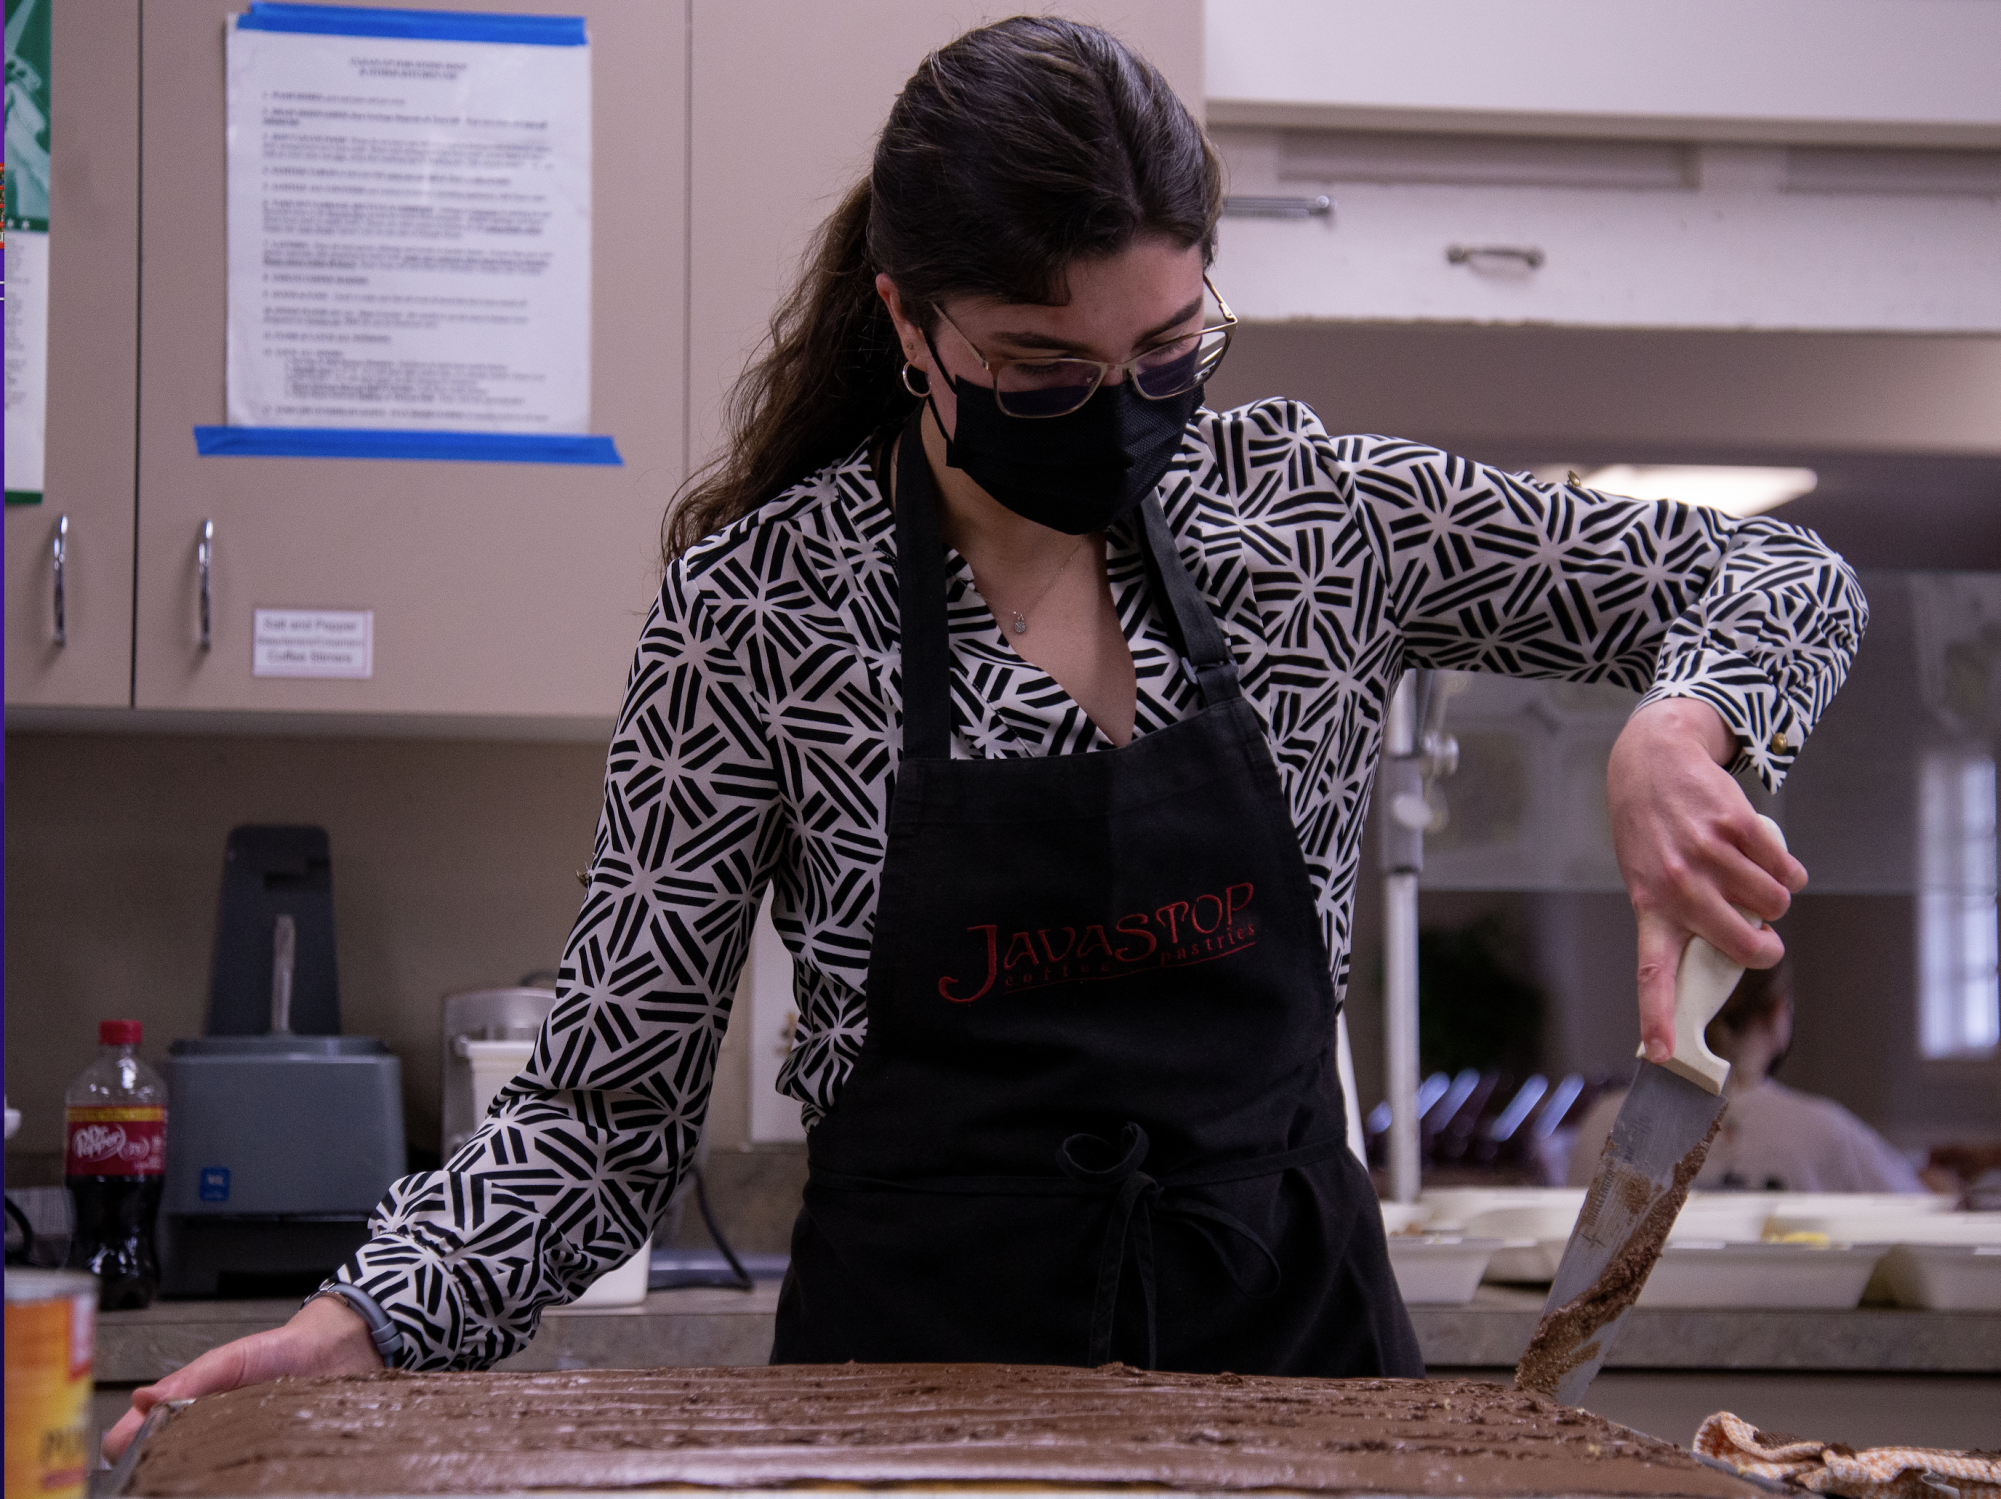 Preparing cake for Stone Soup diners at First Christian Church in Downtown Corvallis on May 24, 2022. Maya Livni is a third-year biochemistry major at OSU.